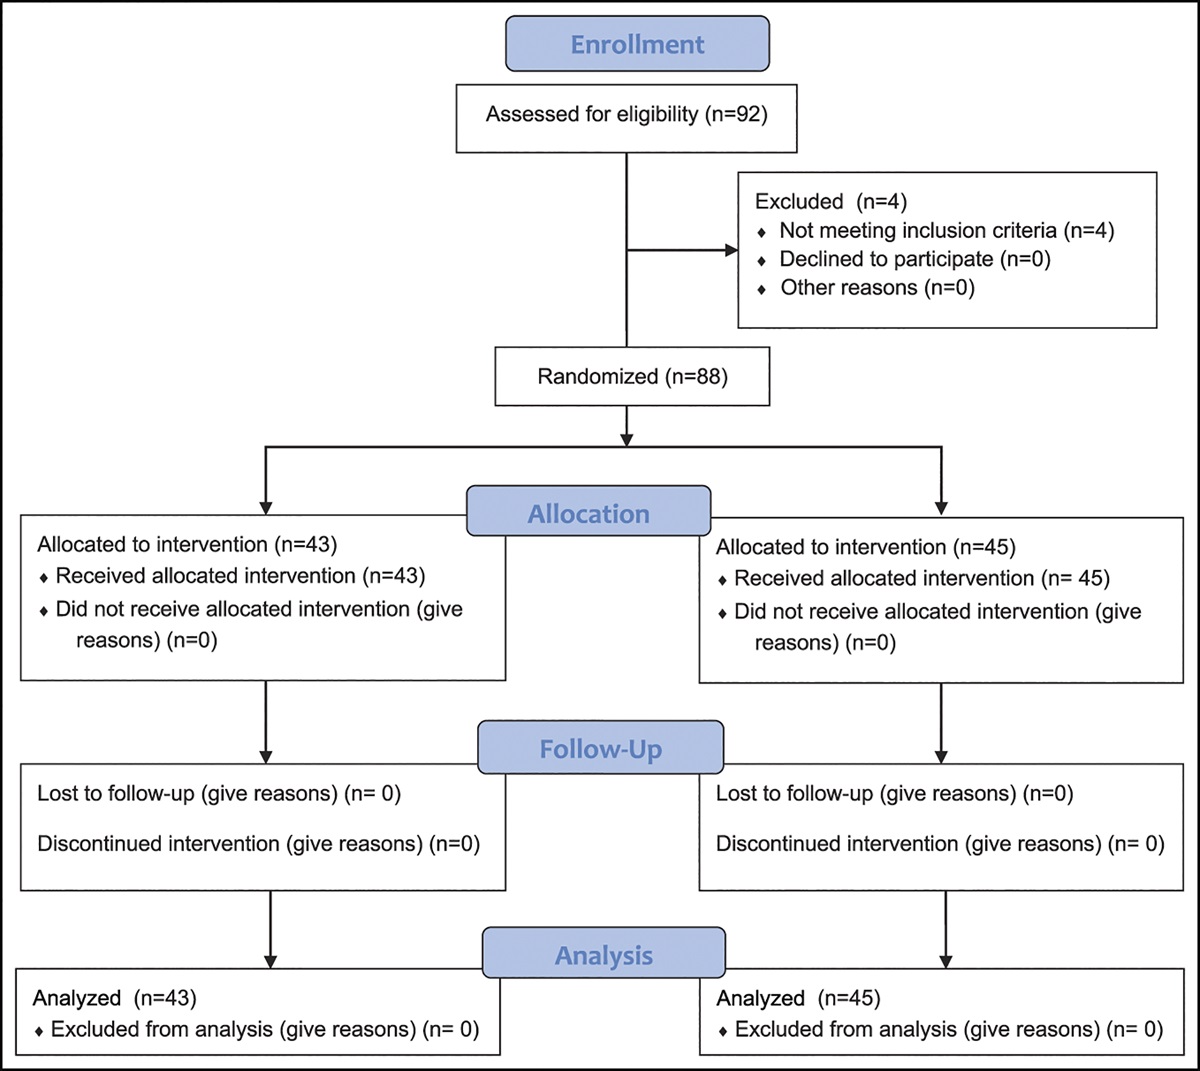 Efficacy of an Opioid-Sparing Perioperative Multimodal Analgesia Protocol on Posterior Lumbar Fusion in a Hispanic Population: A Randomized Controlled Trial